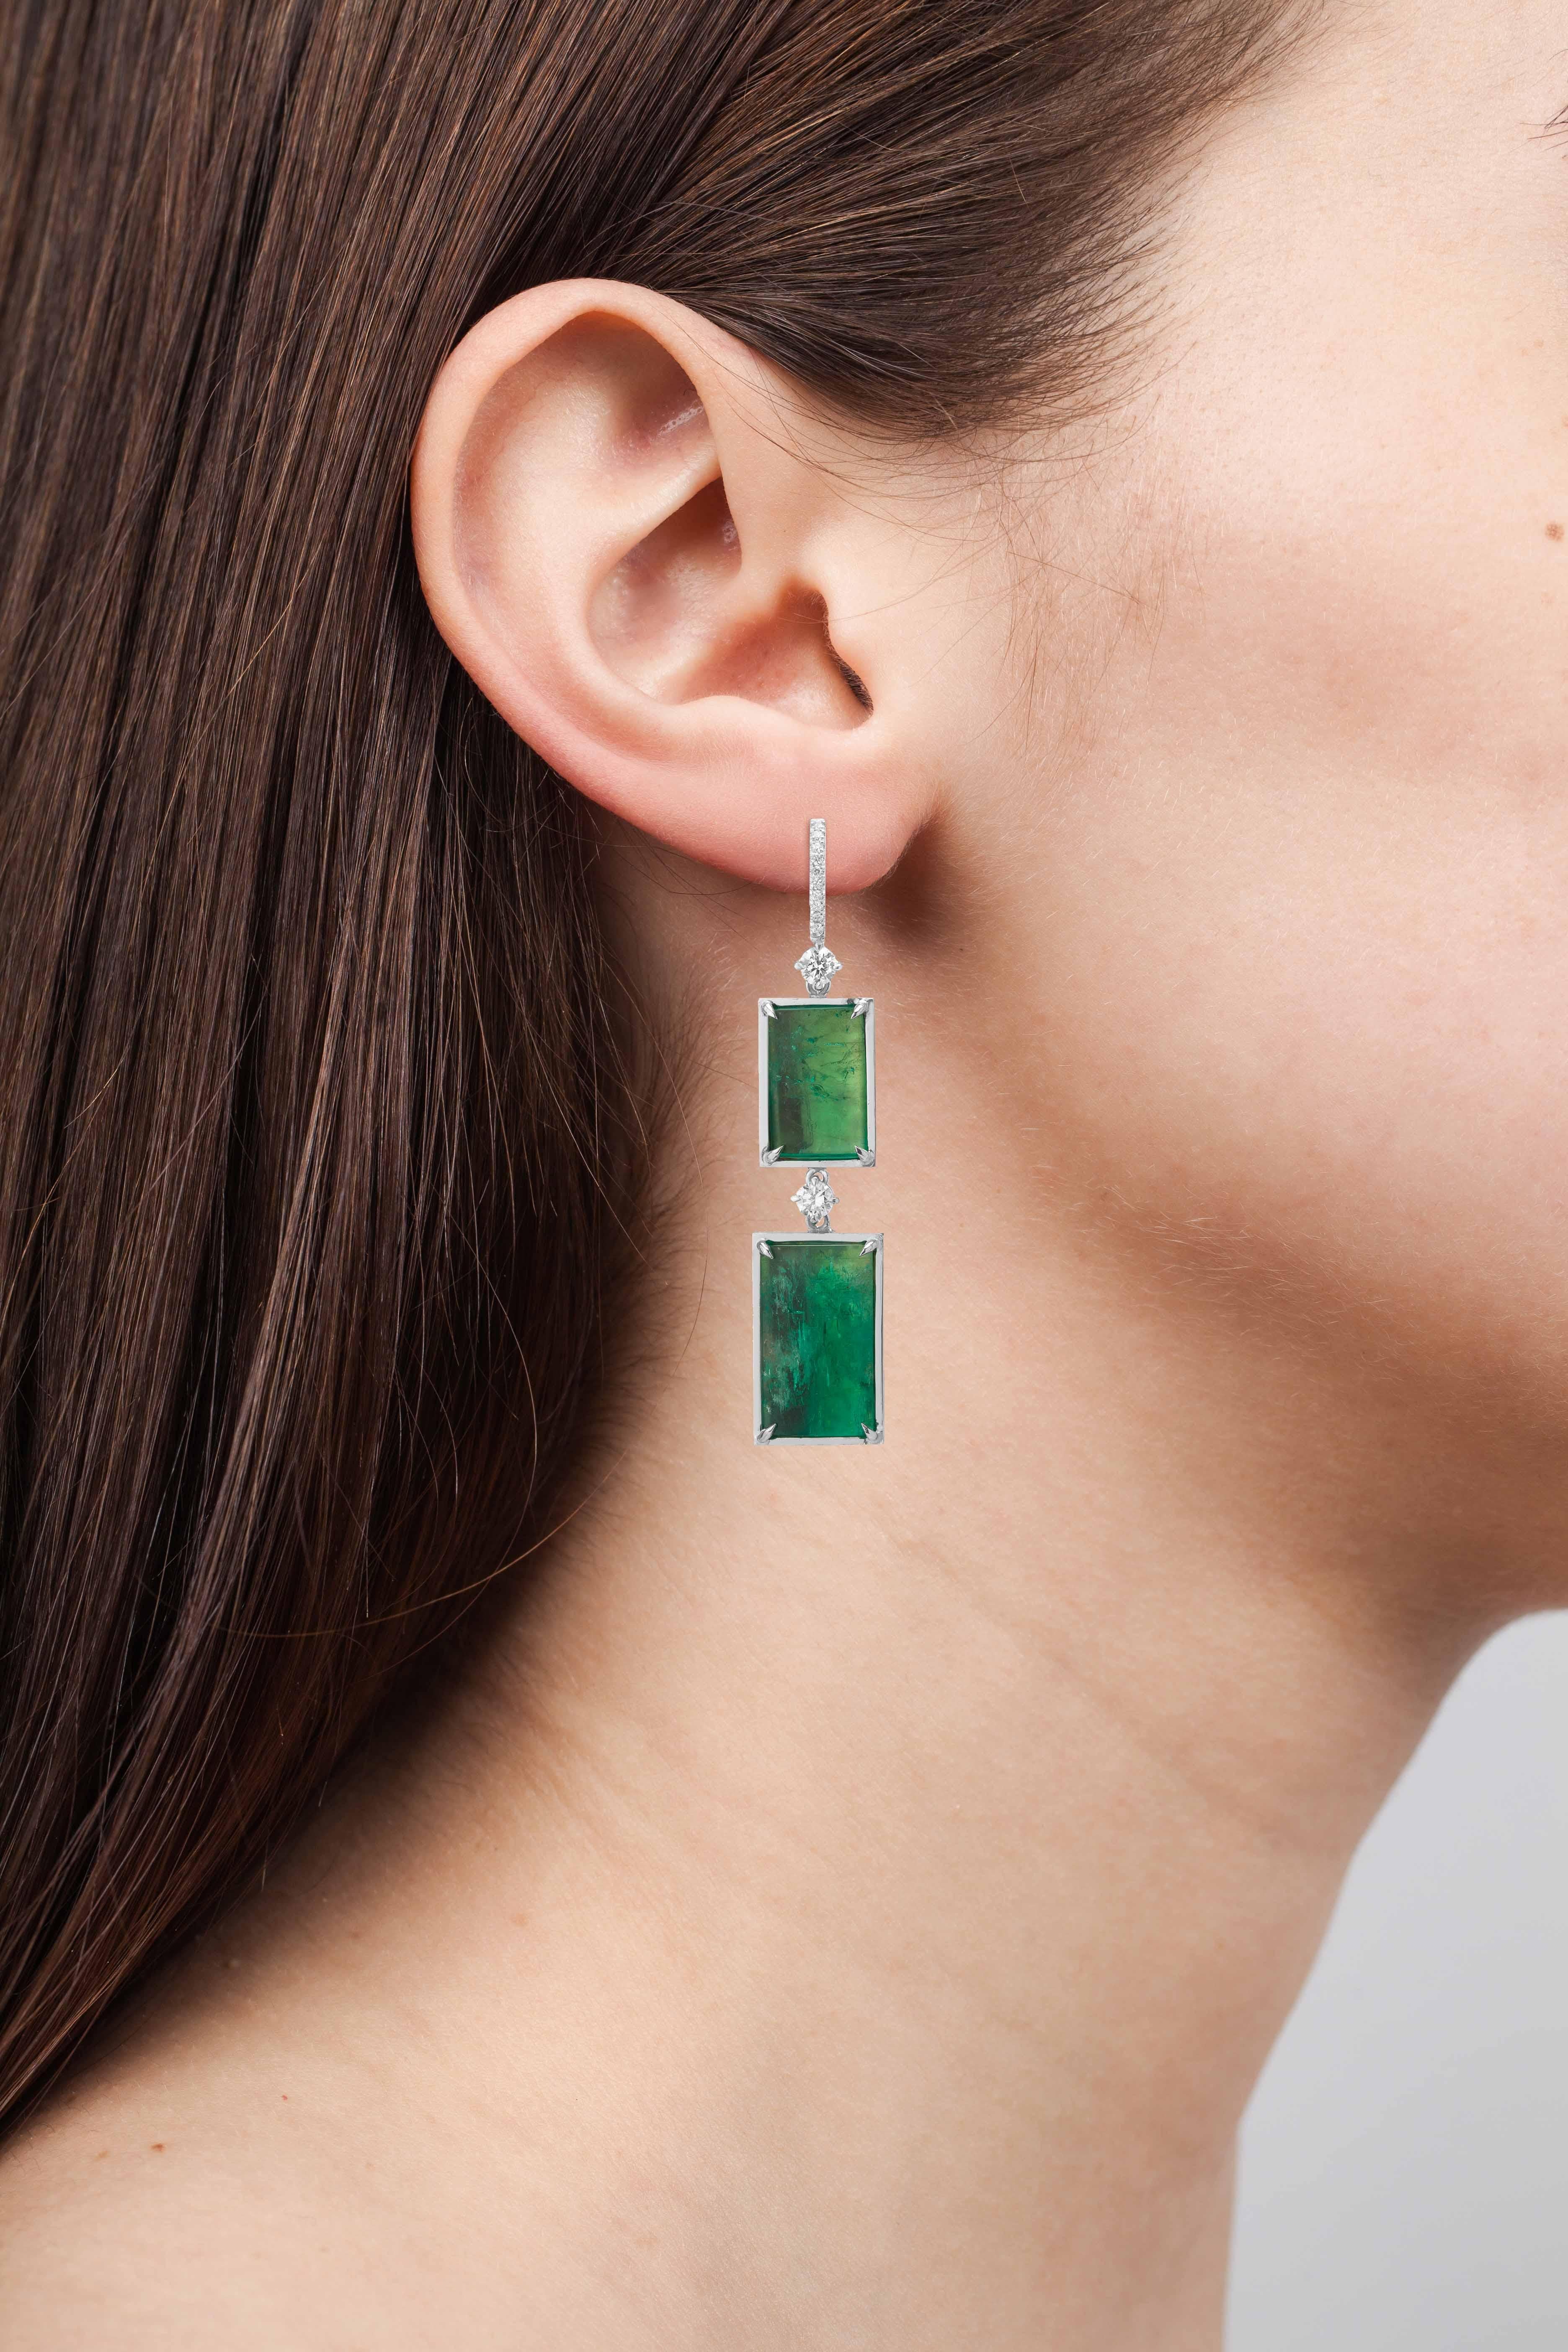 Muzo Emerald Colombia Heritage Atocha Earrings set with 17.82 carats Emerald

Atocha is inspired by a collection of jeweled treasures destined for the Royal family, who ruled the Spanish Empire in the 17th century.  The galleons of the Nuestra